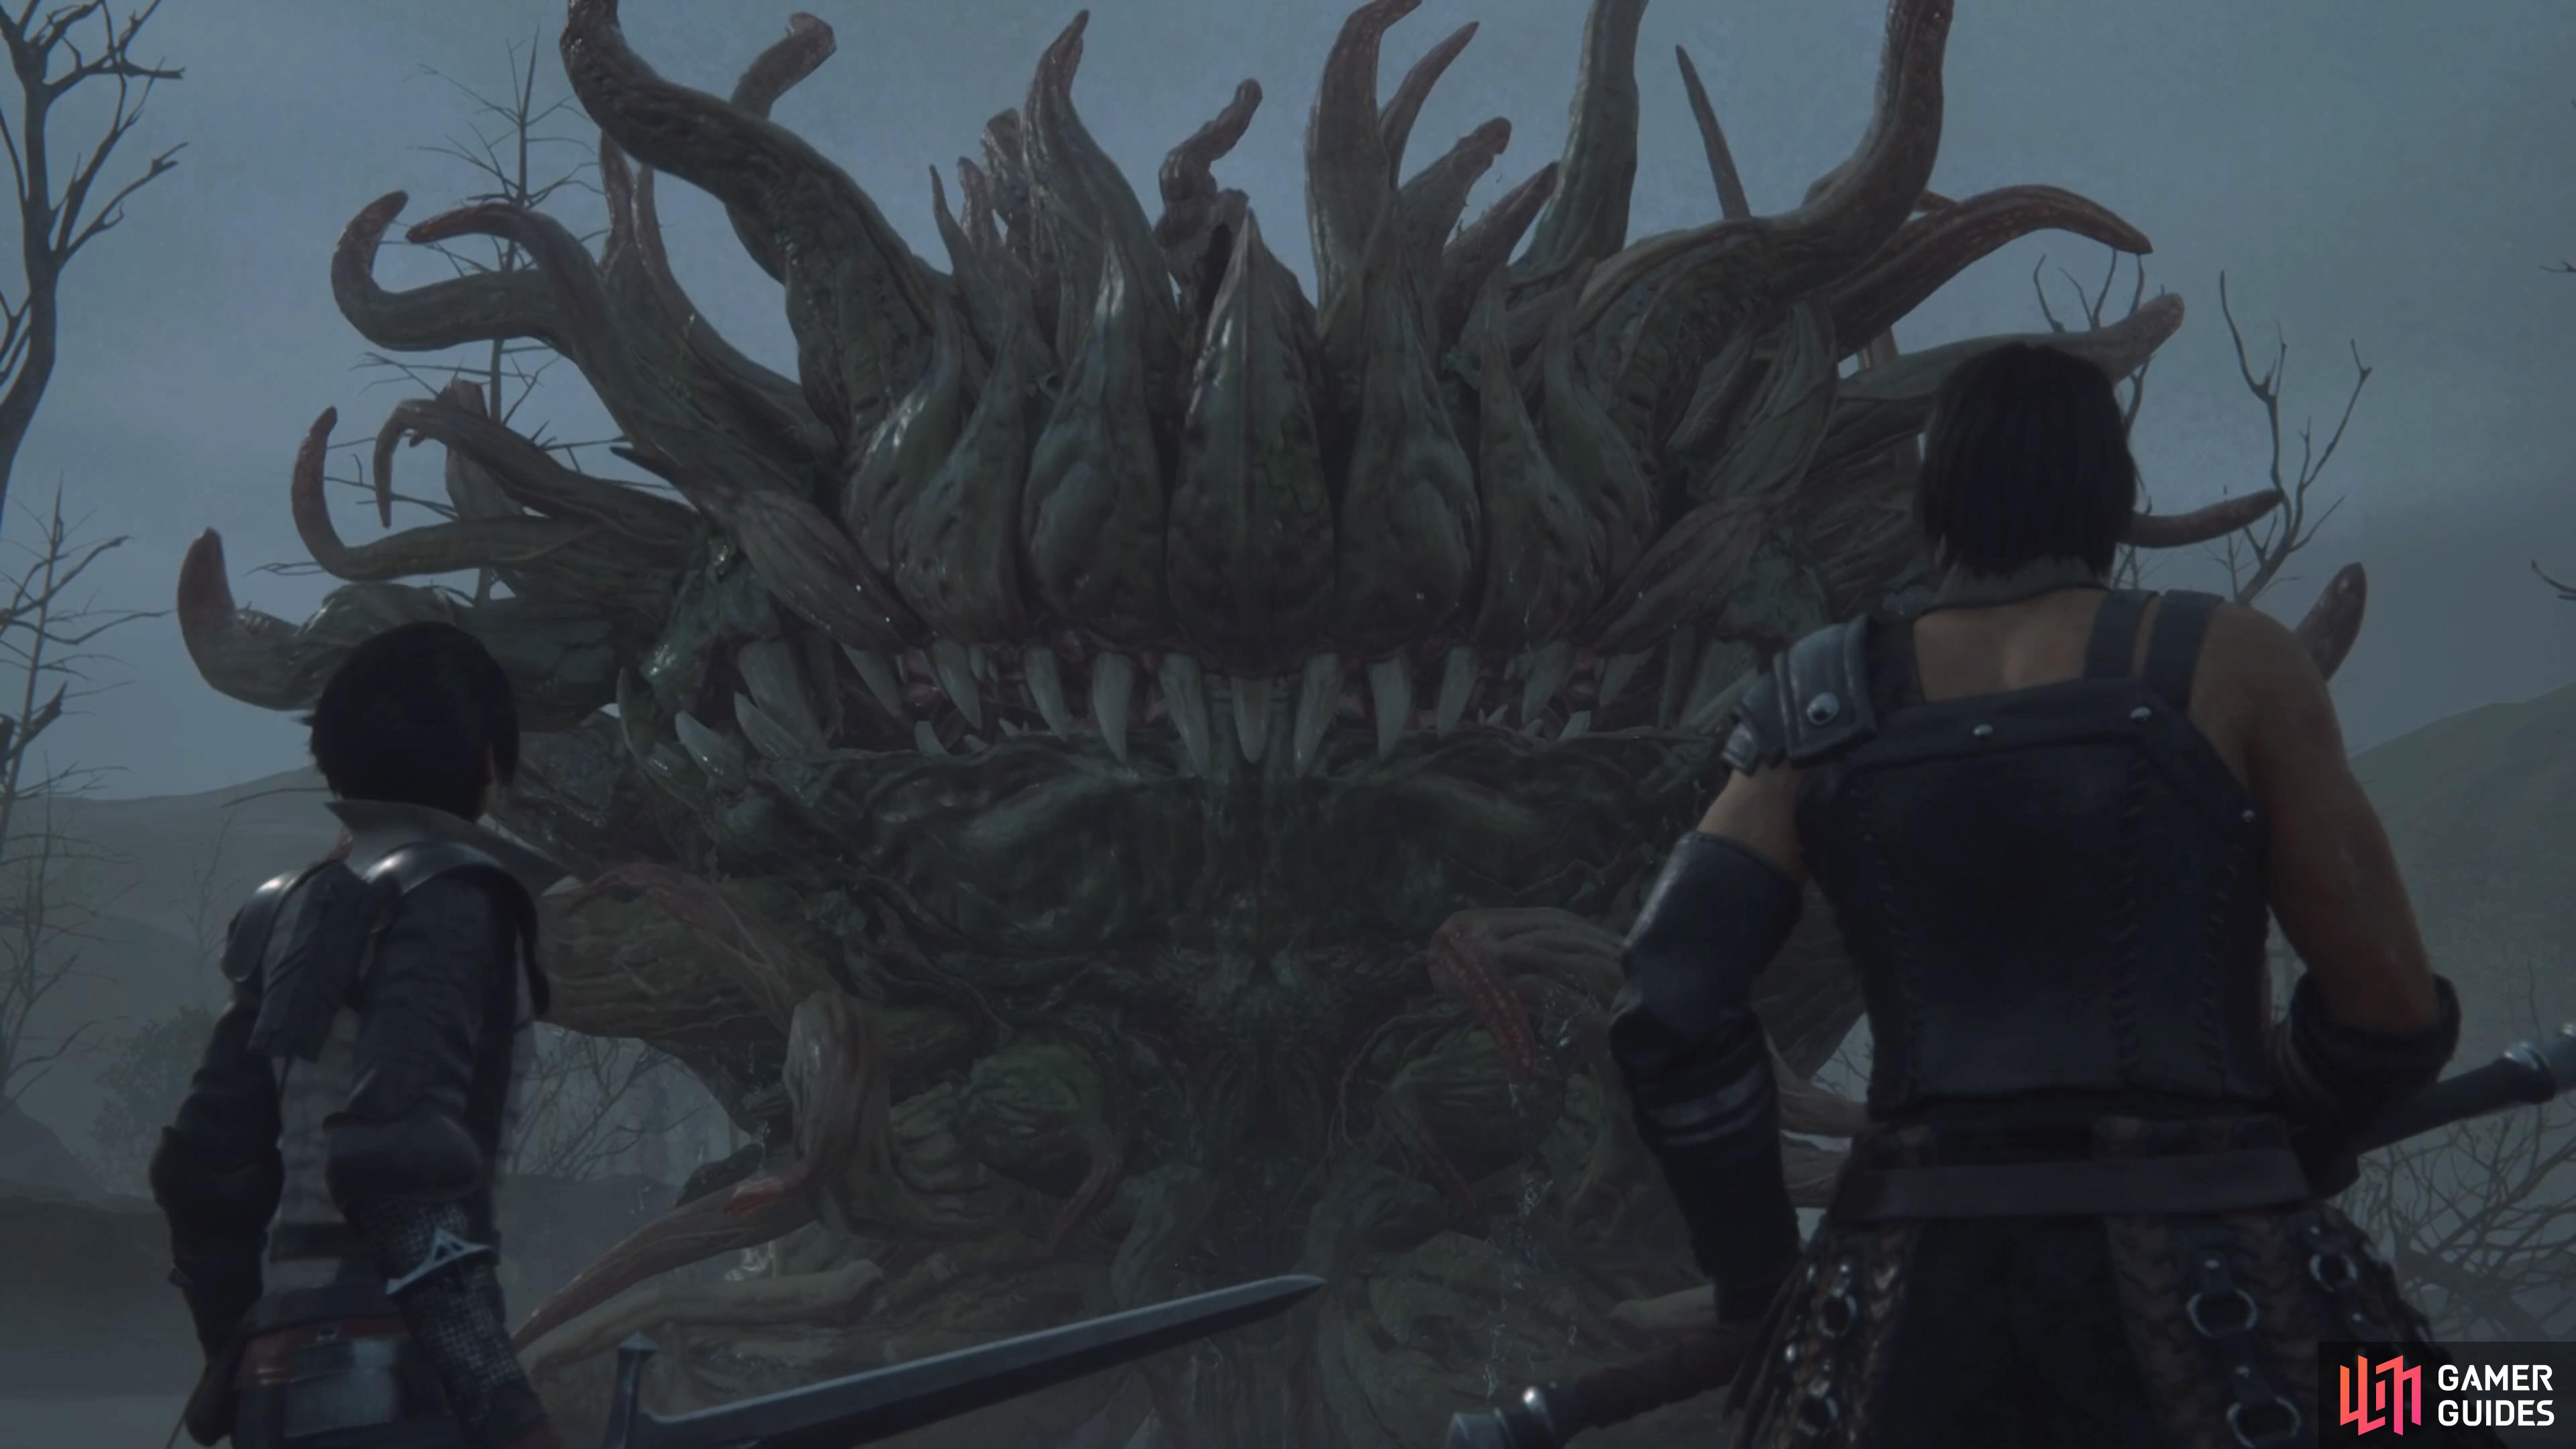 The Final Fantasy staple enemy will be your first true test.